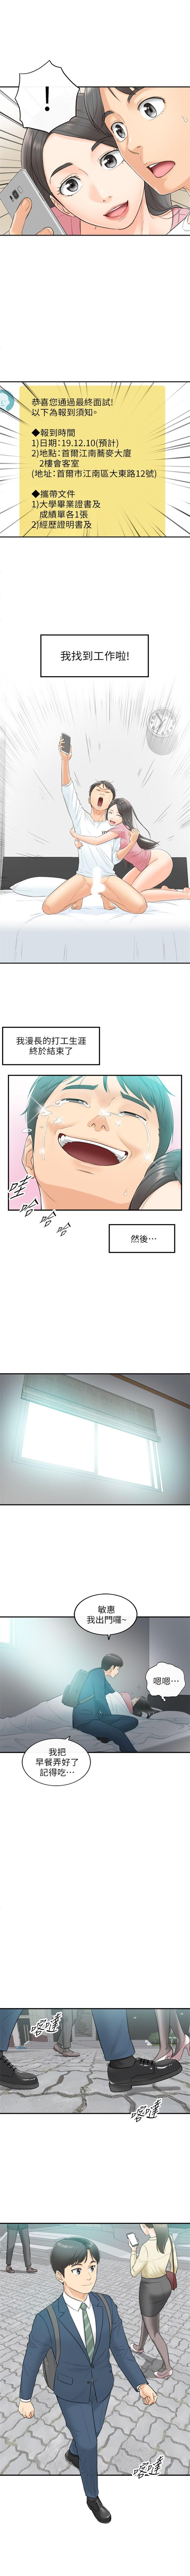 Squirting 正妹小主管 1-54 官方中文（連載中） Mofos - Page 8